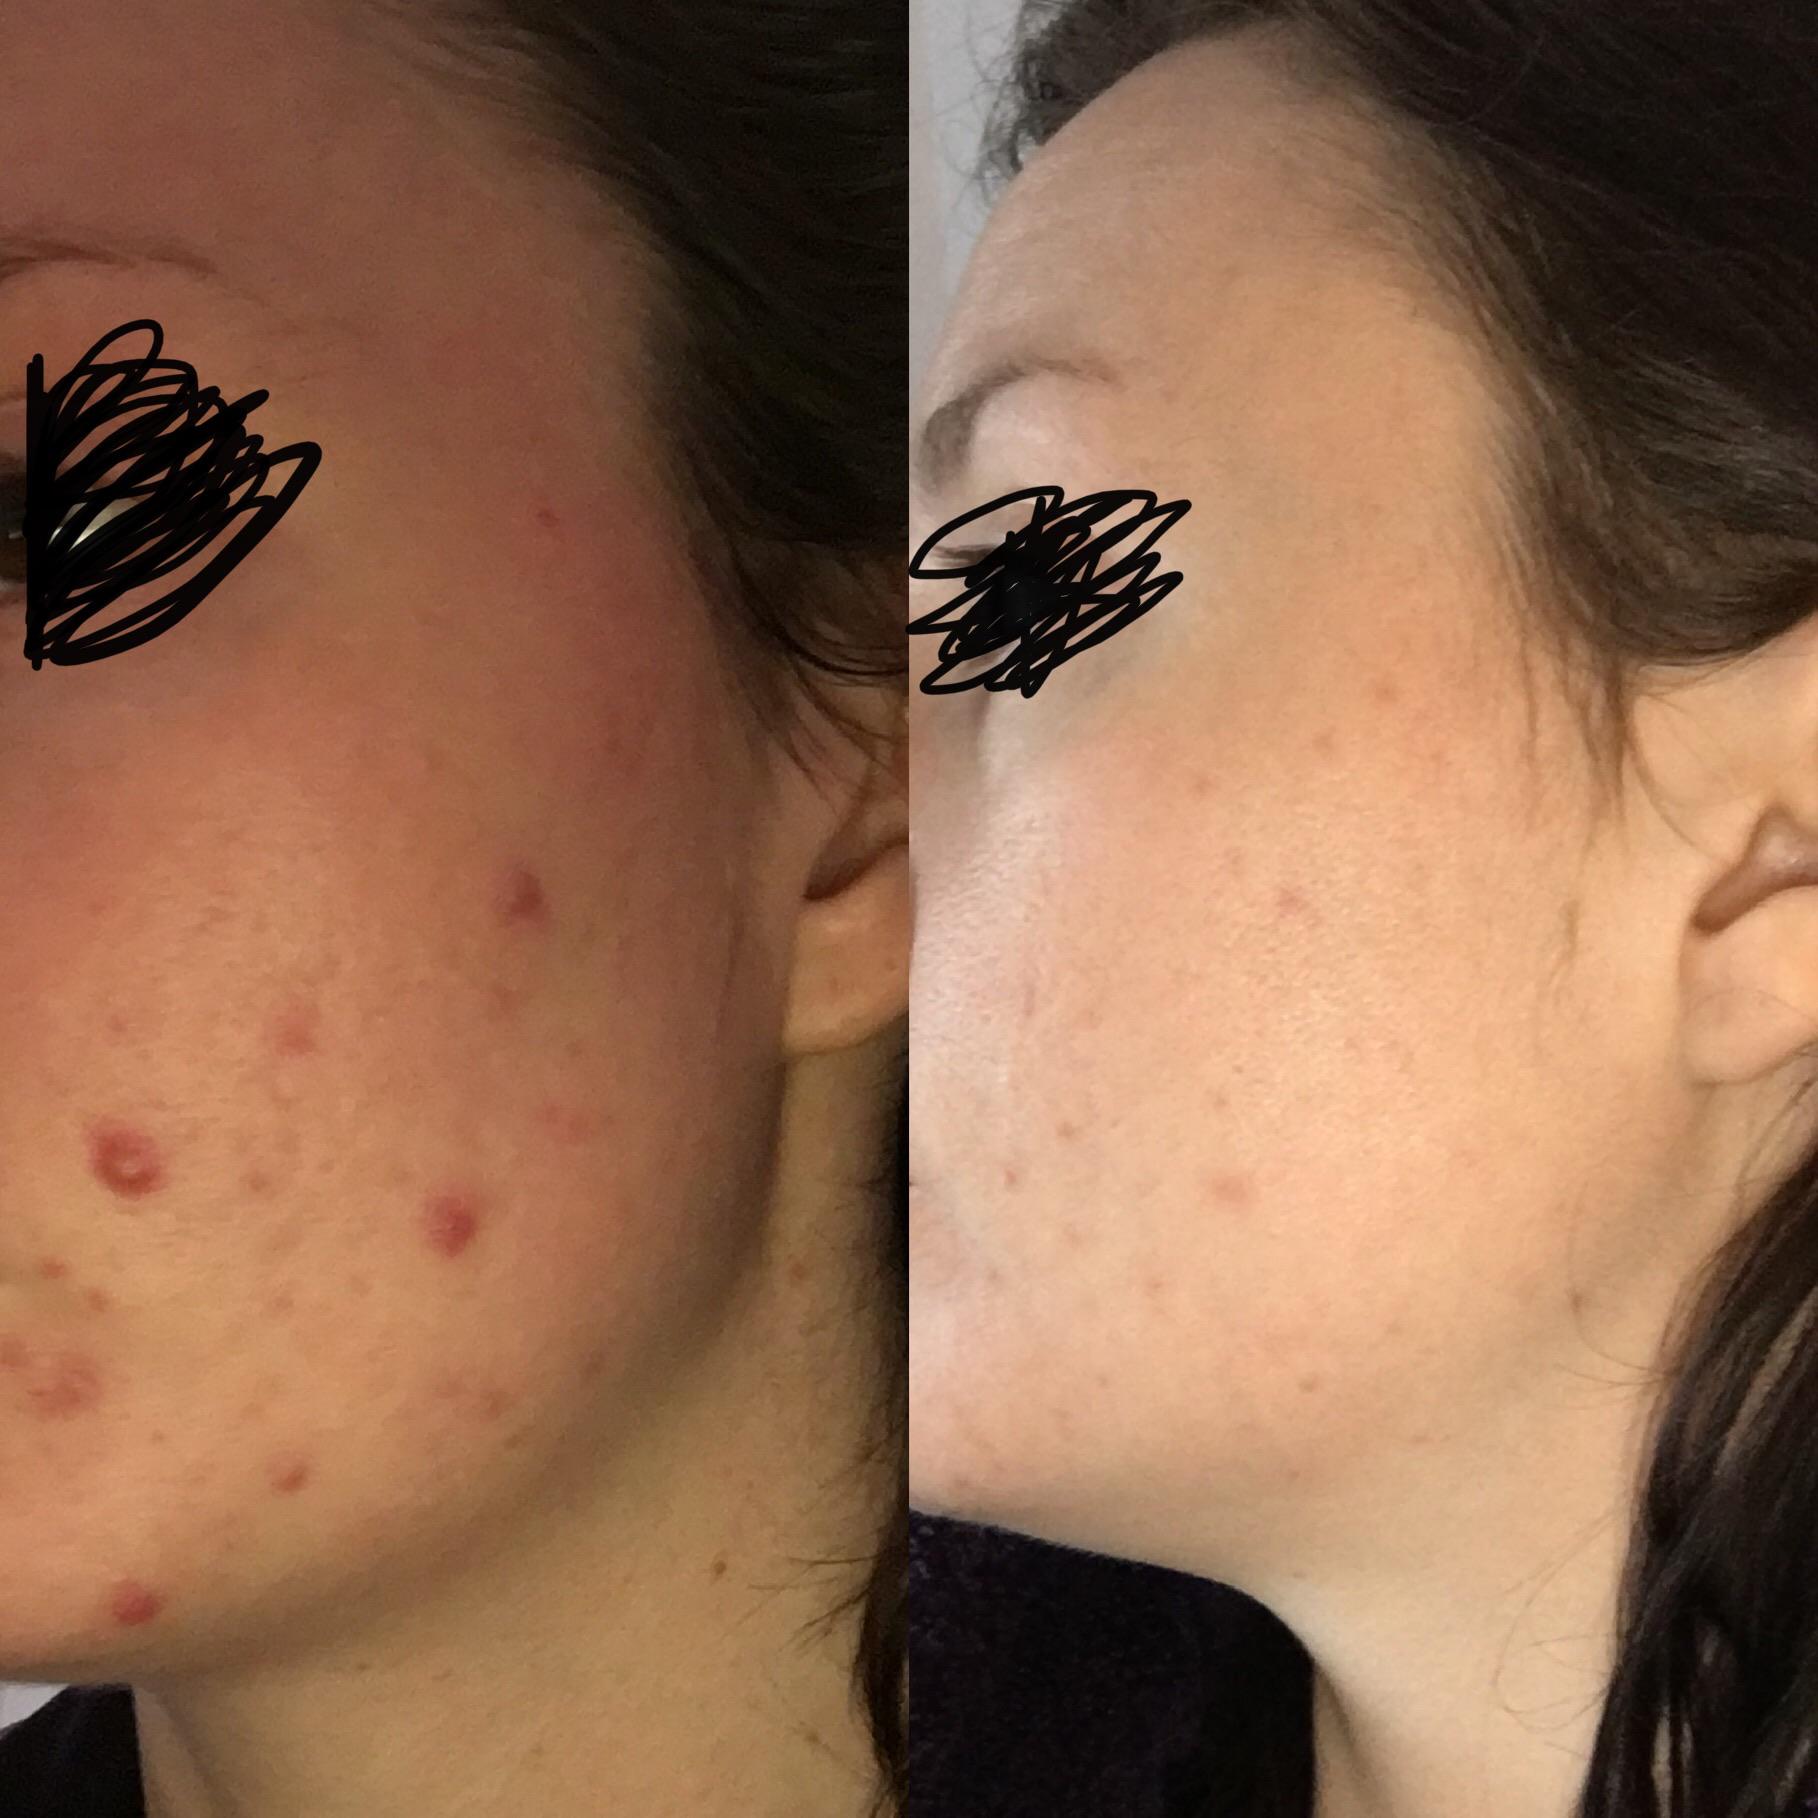 6 week progress after stopping meds (antibiotics) and using 100% ...